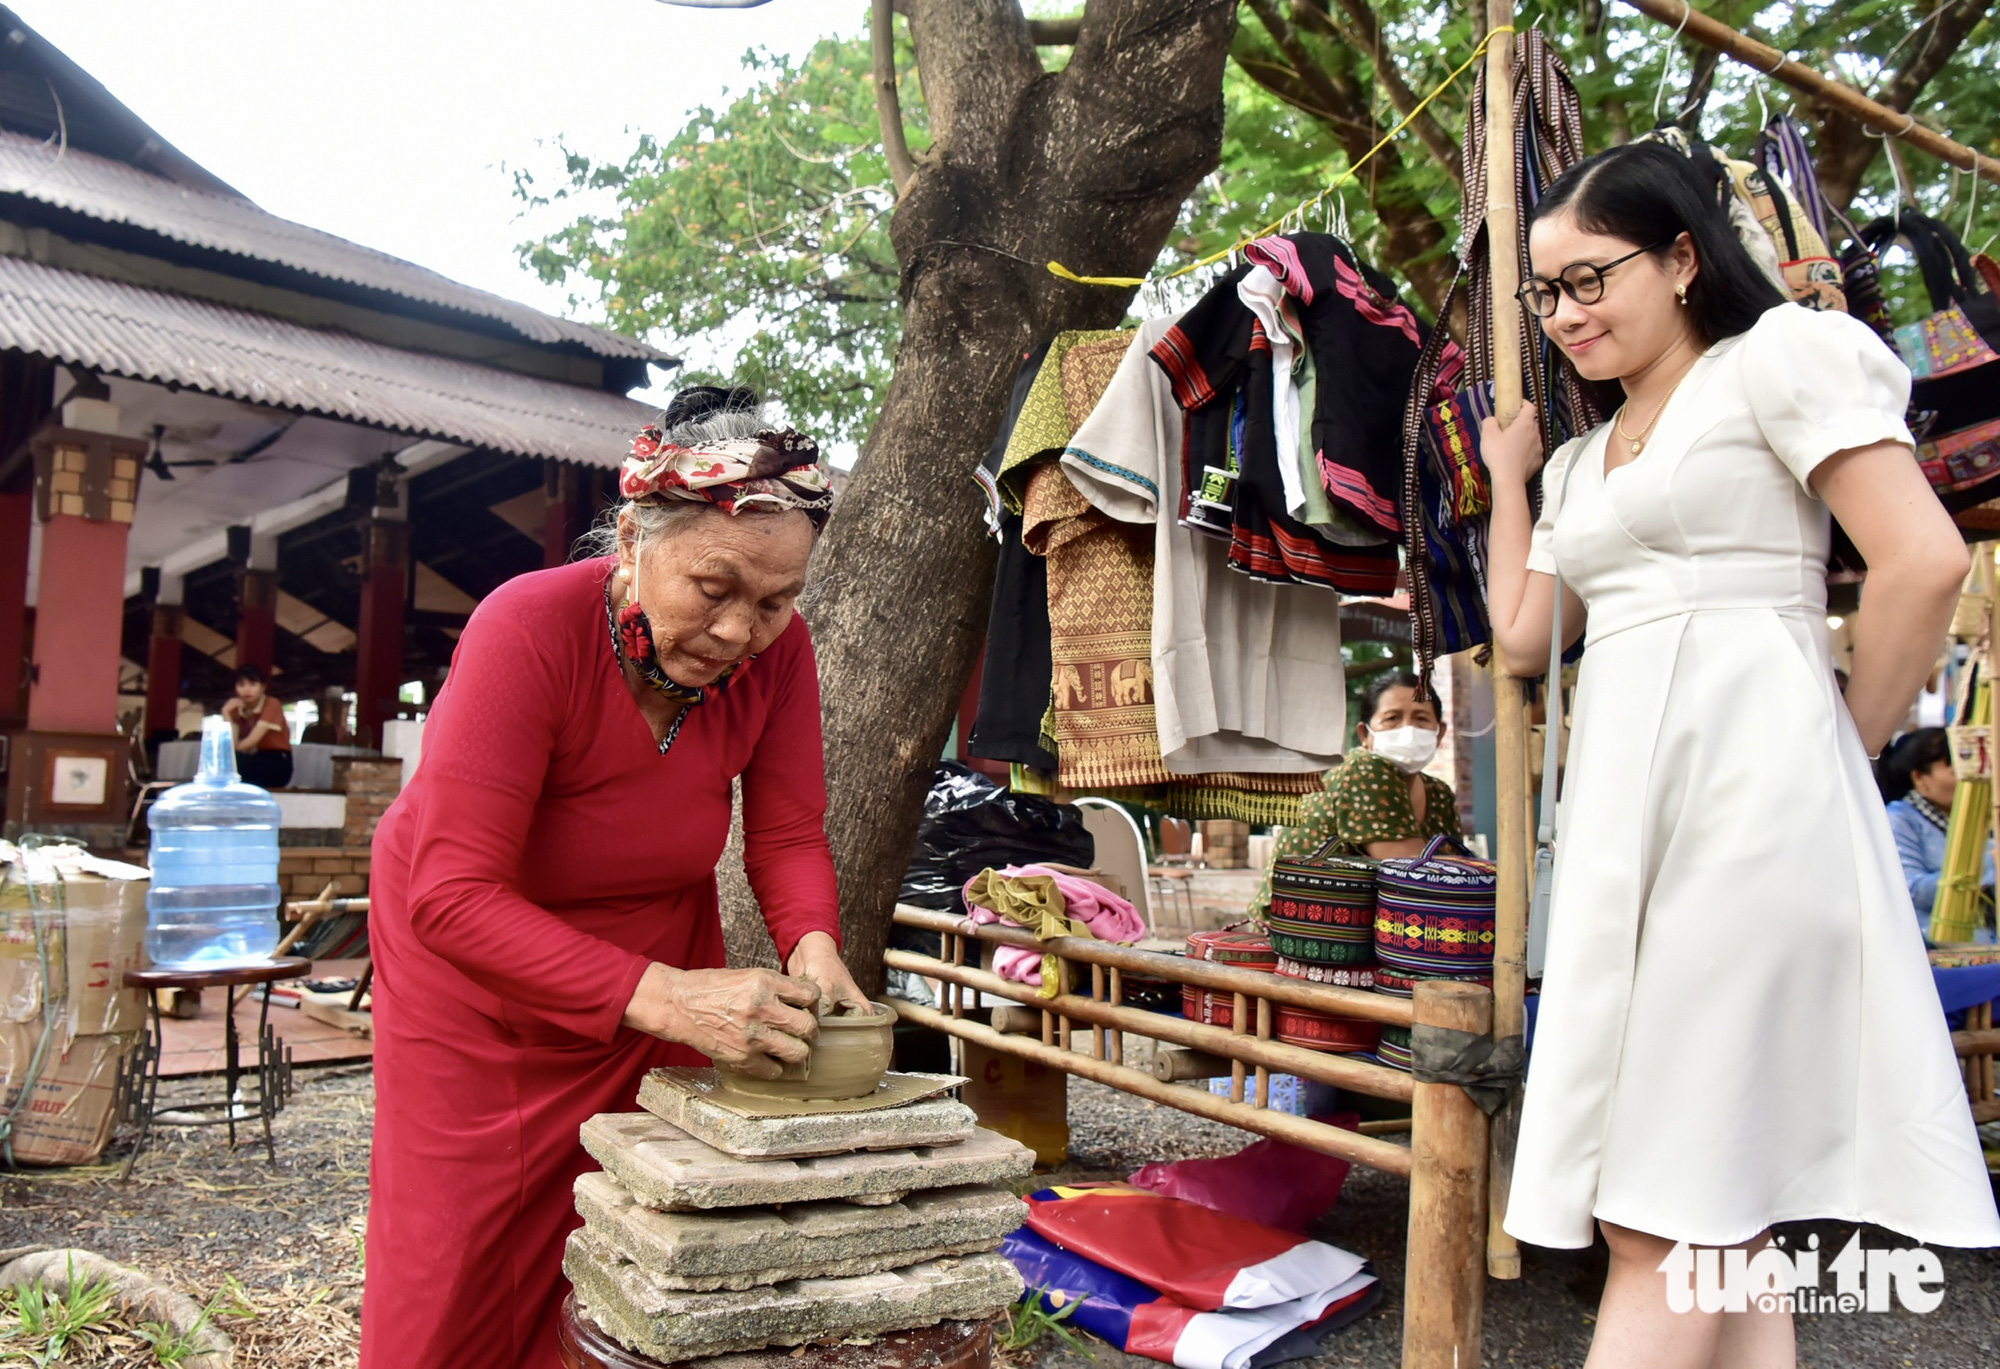 An artisan performs the art of making potteries by the Cham people in Bau Truc Village in south-central Ninh Thuan Province at the opening of the Saigontourist Group Food and Culture Festival 2023 at Van Thanh Tourist Site in Binh Thanh District, Ho Chi Minh City on April 20, 2023. Photo: T.T.D. / Tuoi Tre